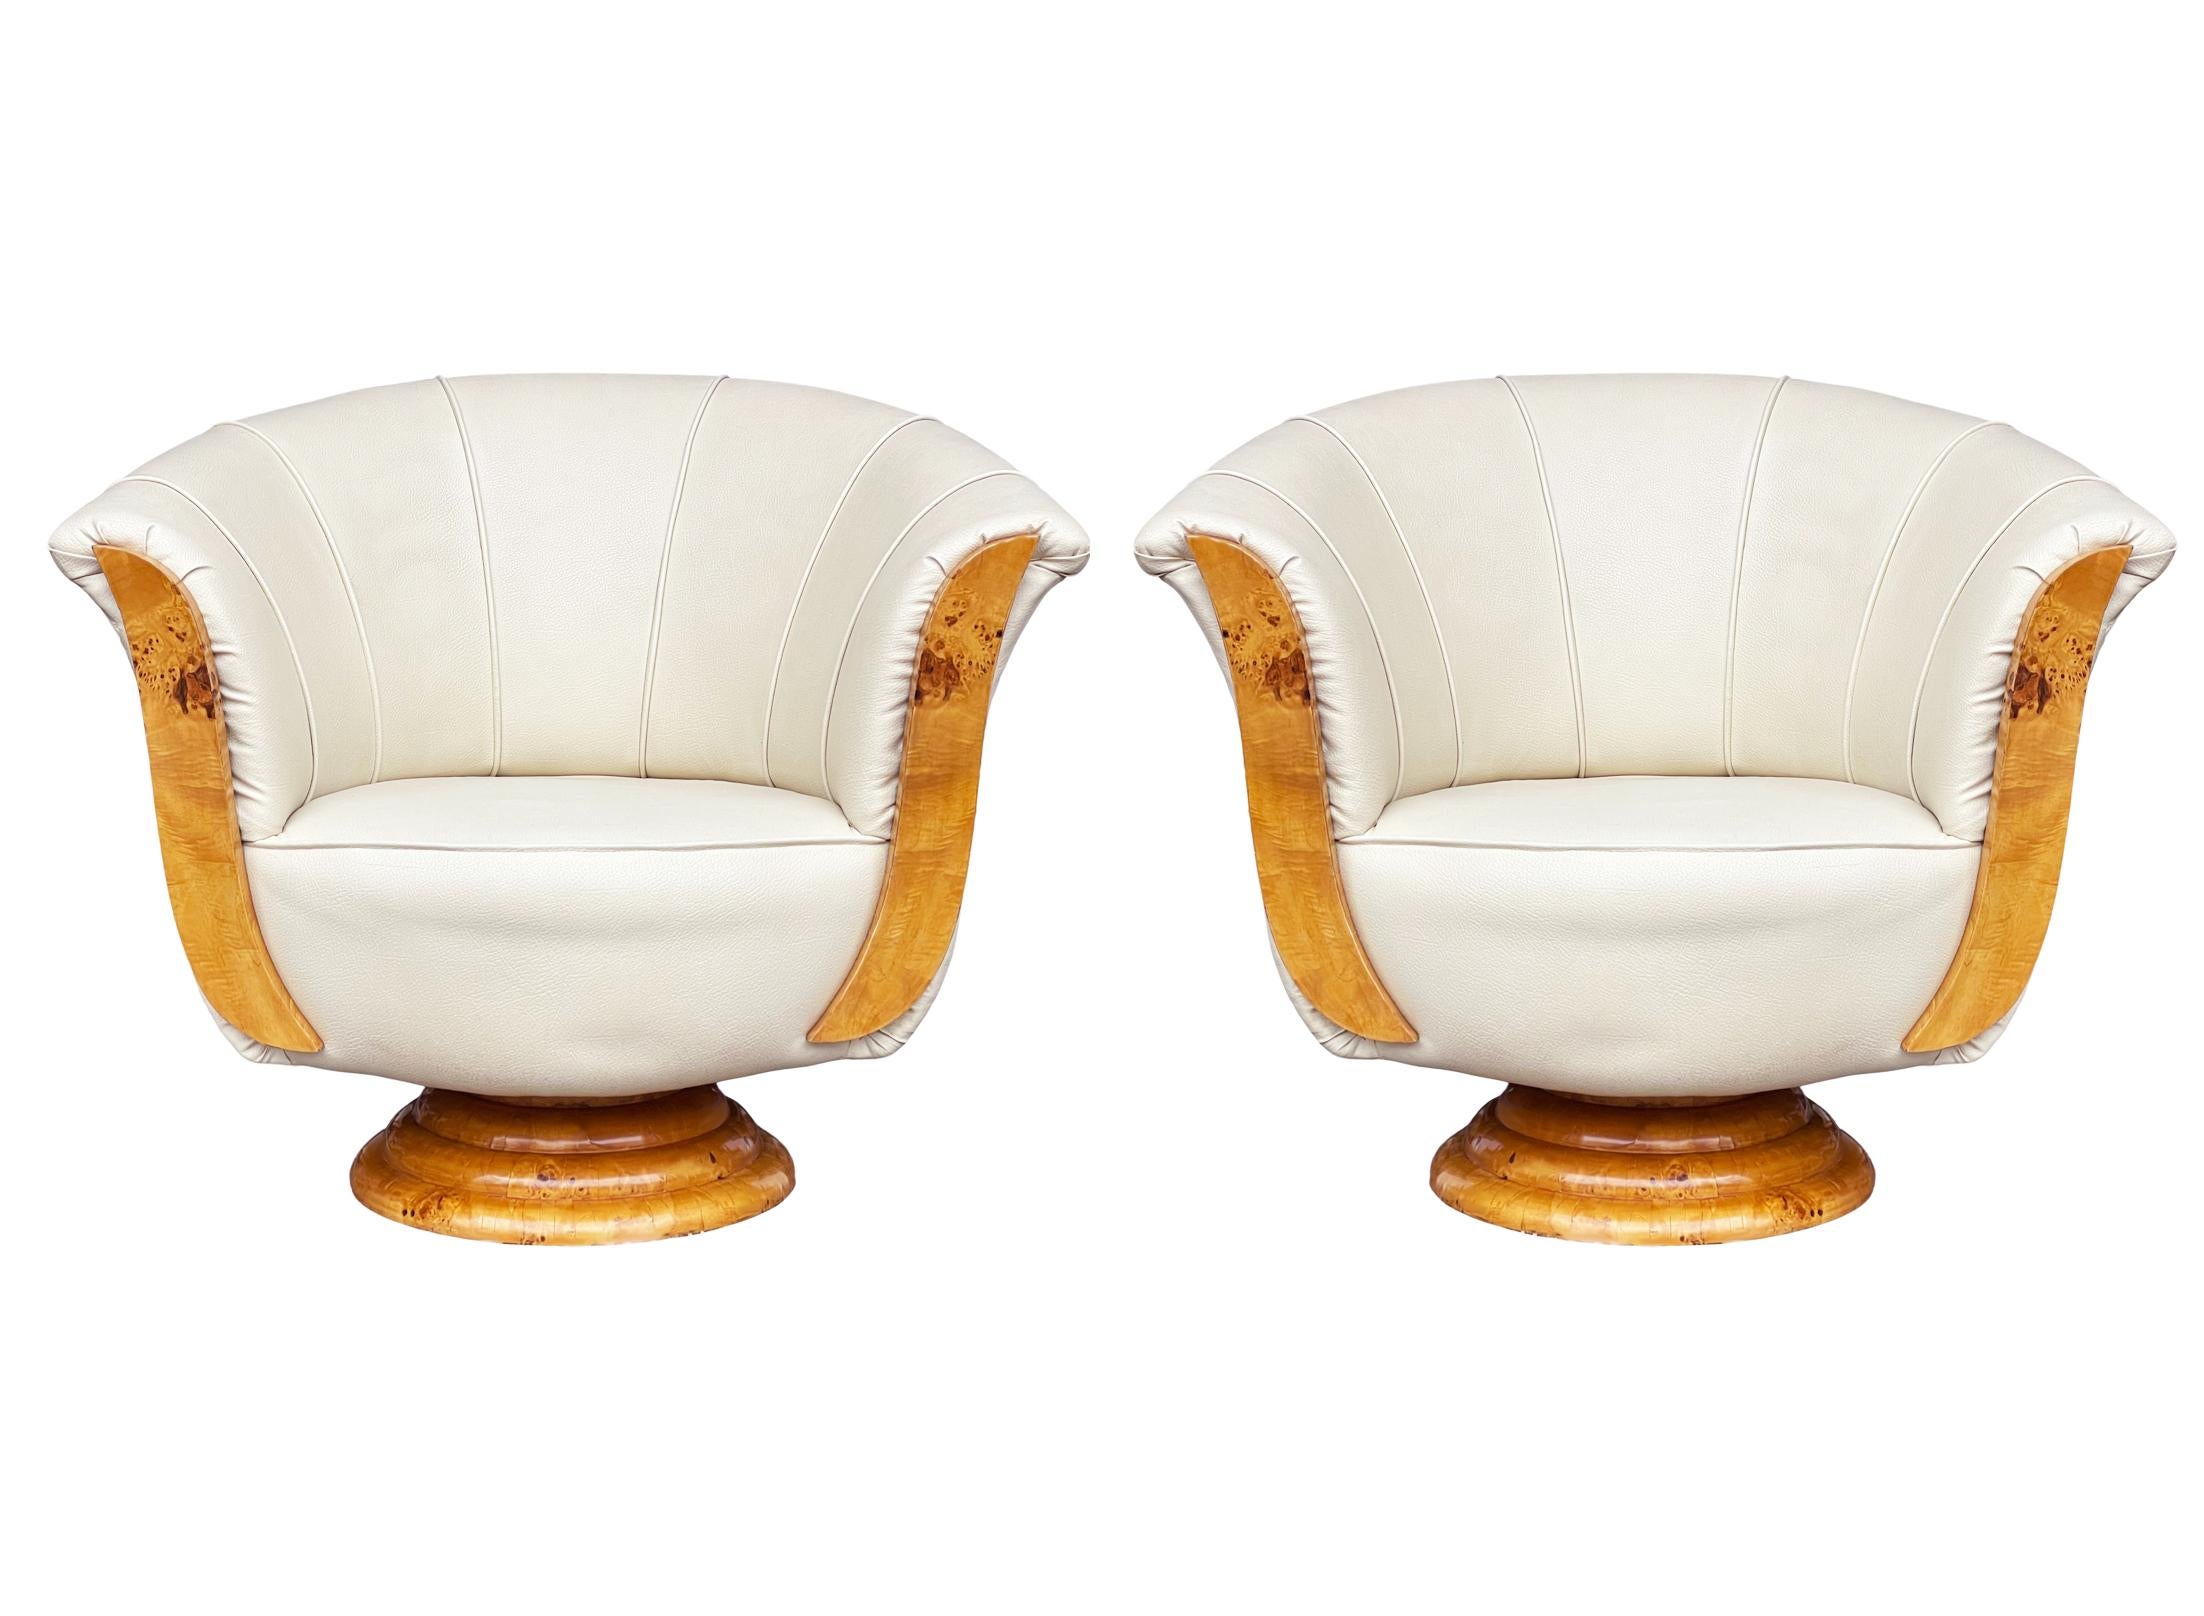 Midcentury Cream Leather & Burl Club Chairs or Lounge Chairs in Art Deco Form For Sale 4